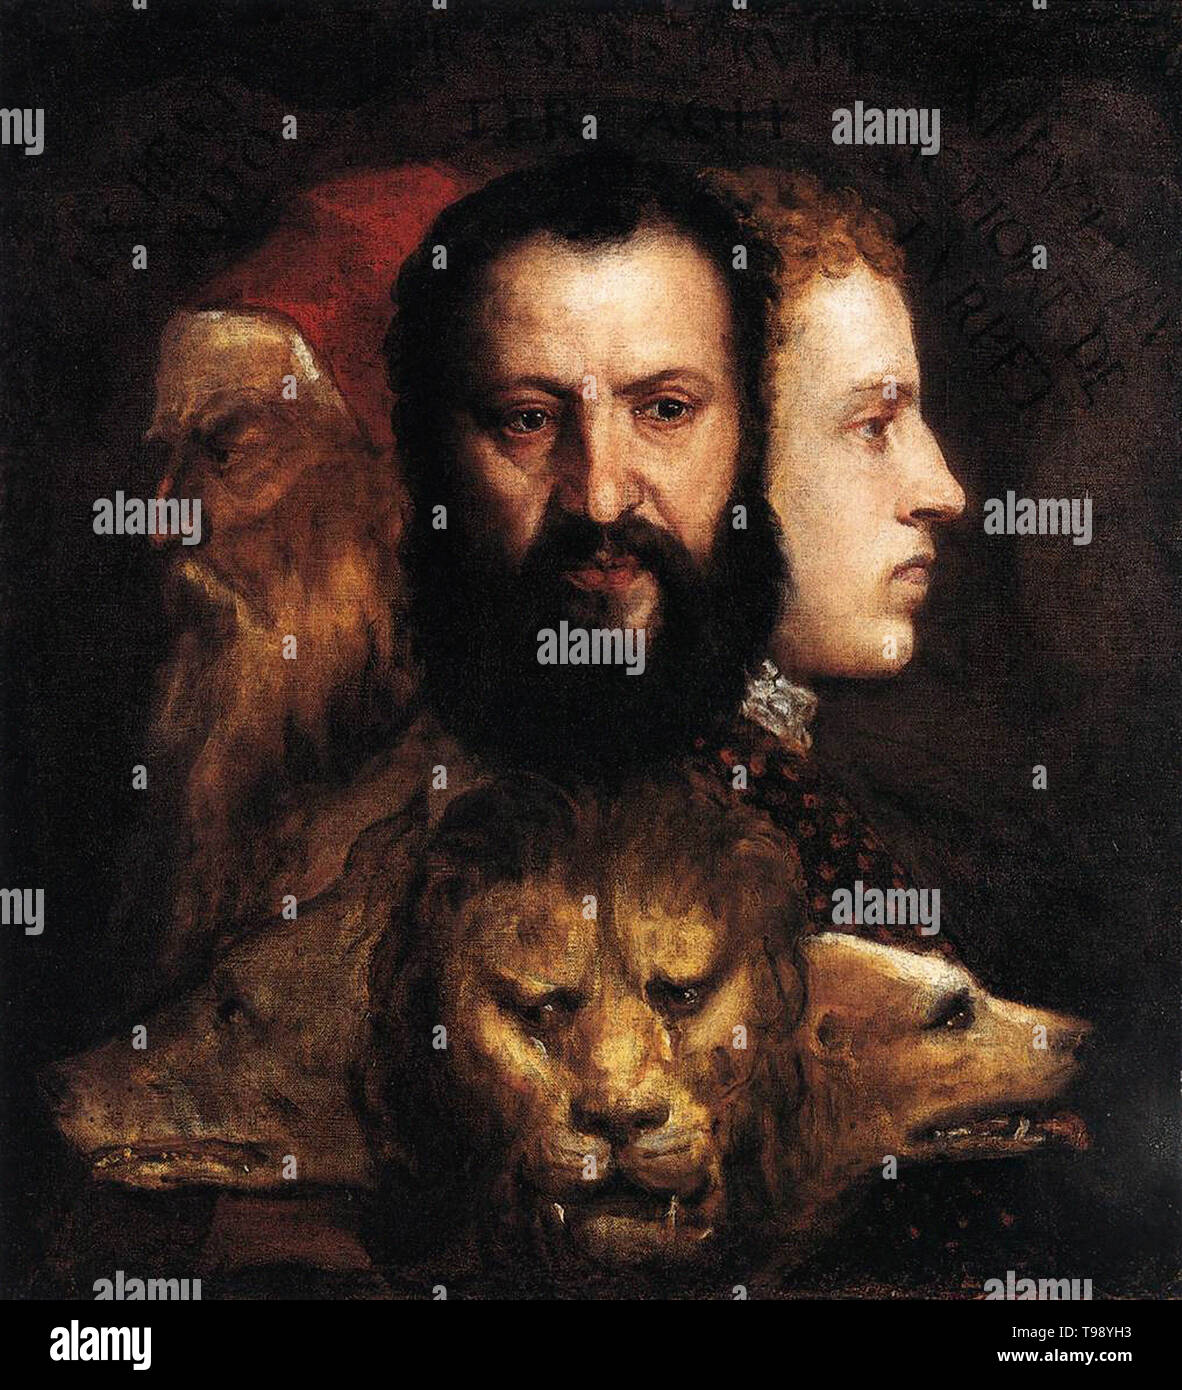 Tiziano Vecelli, Titian - Allegory Time Governed Prudence C 1565 Stock Photo